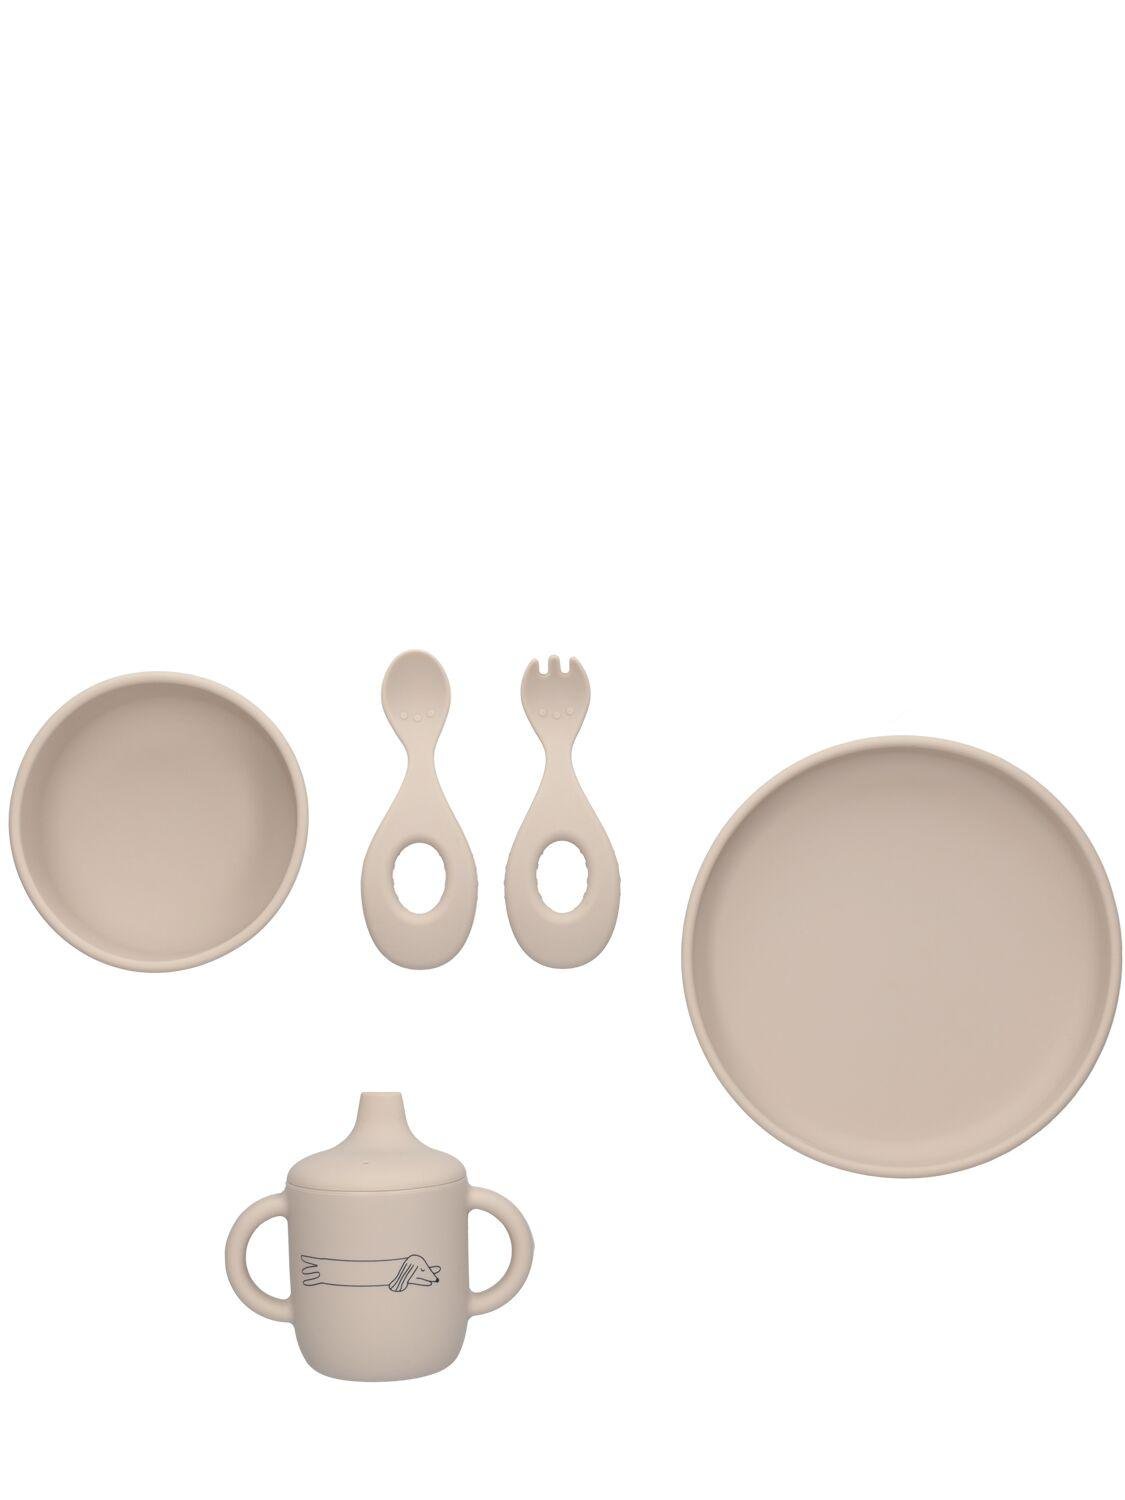 Dog Print Silicone Tableware Set by LIEWOOD